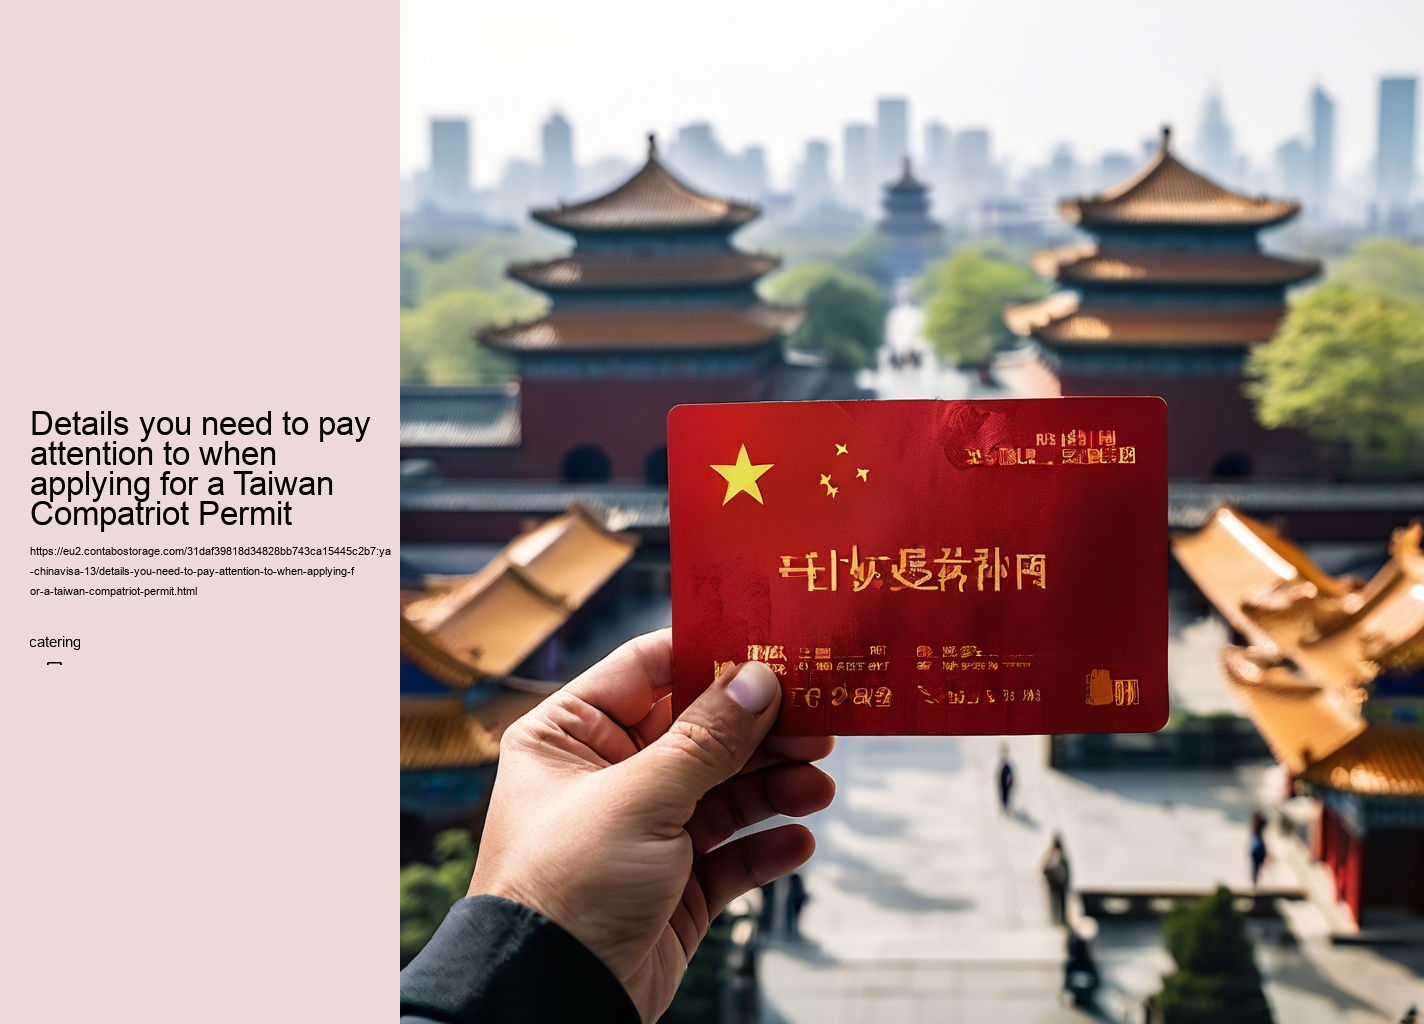 Details you need to pay attention to when applying for a Taiwan Compatriot Permit